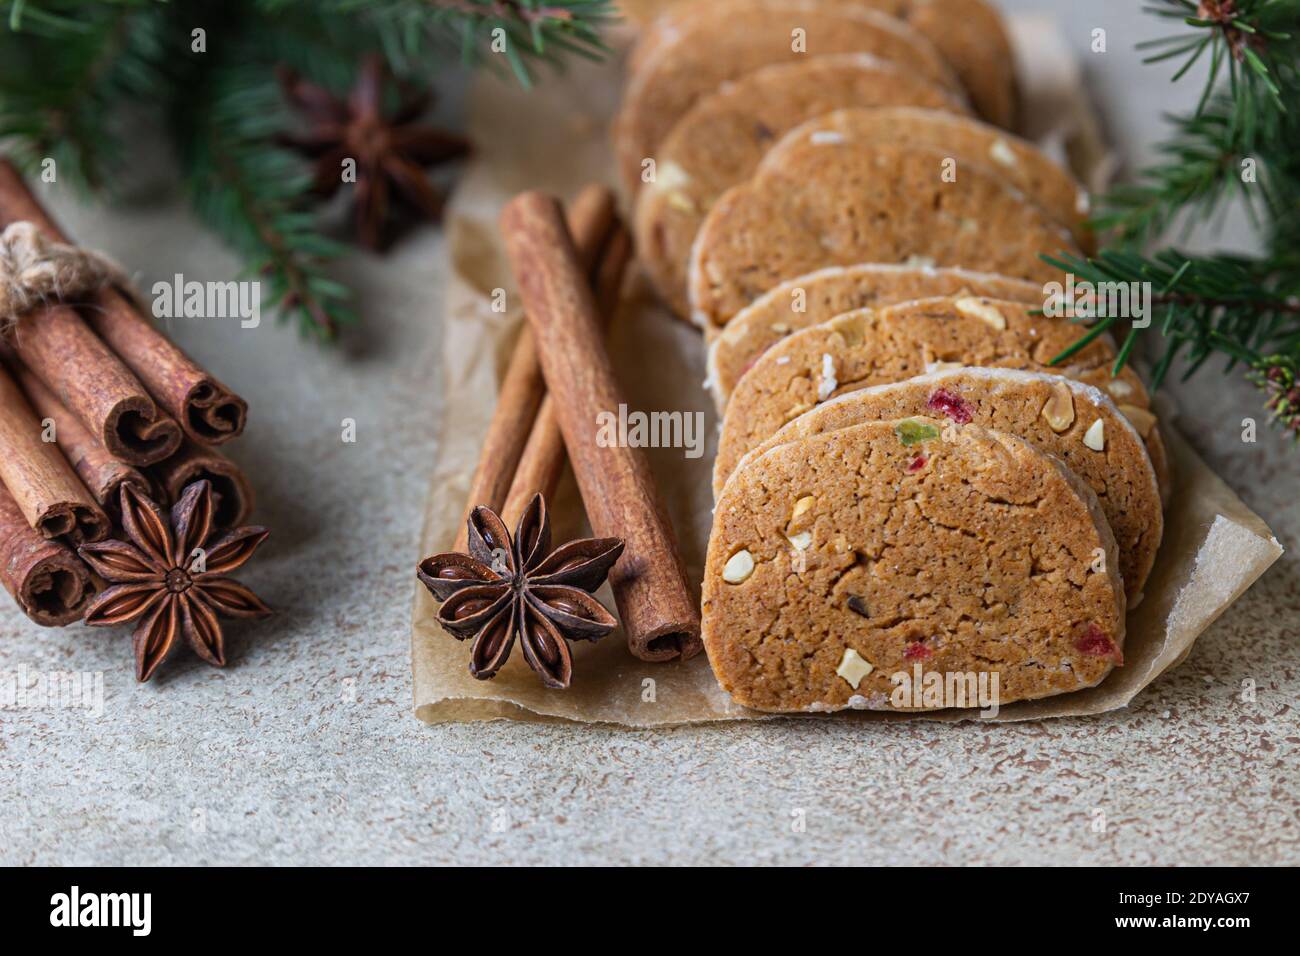 Danish spicy butter cookies with candied fruits, cinnamon sticks and anise, light background. Festive Christmas or New Year background with fir branch Stock Photo